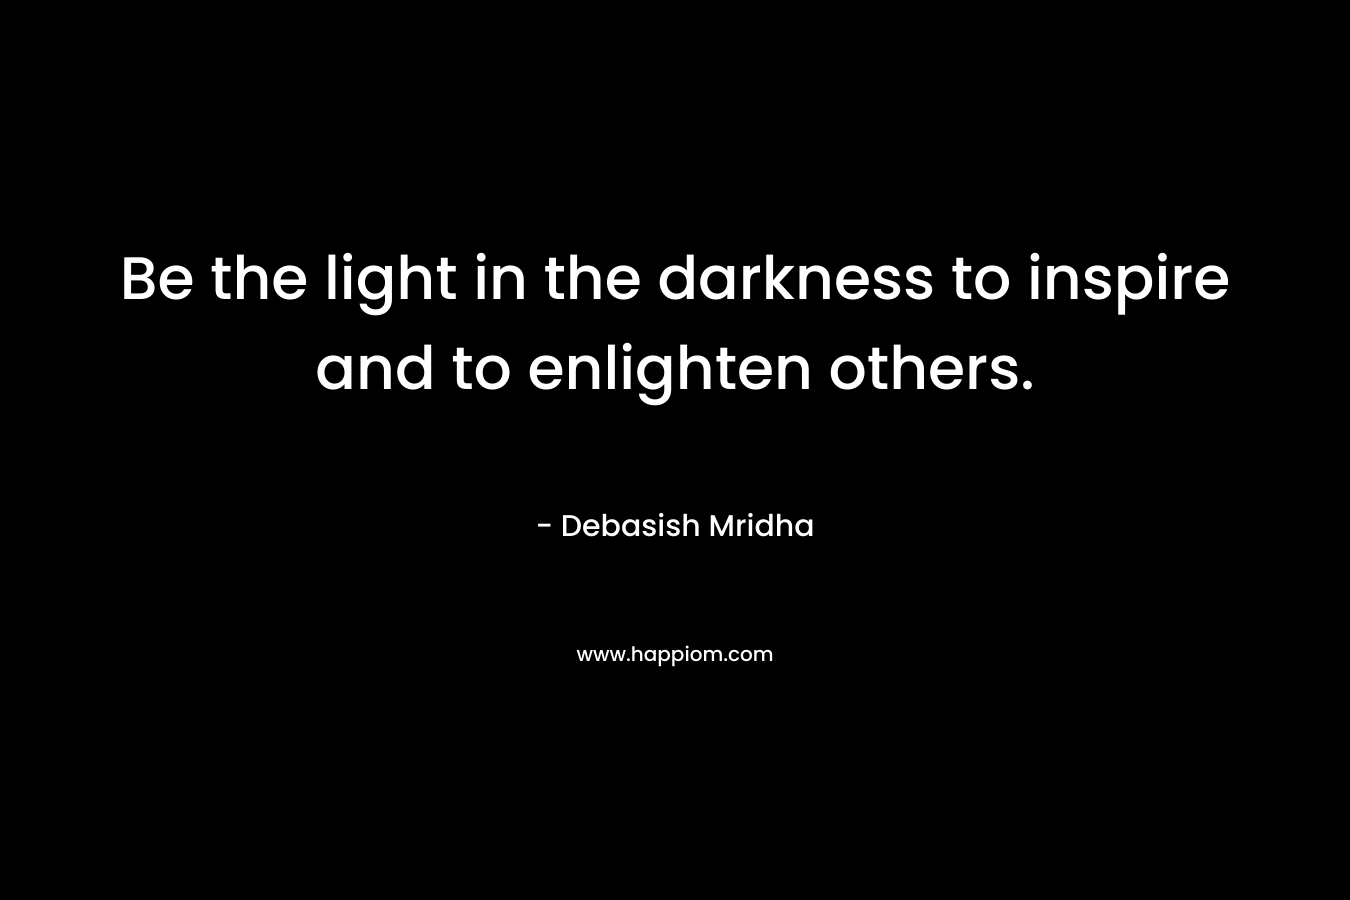 Be the light in the darkness to inspire and to enlighten others.